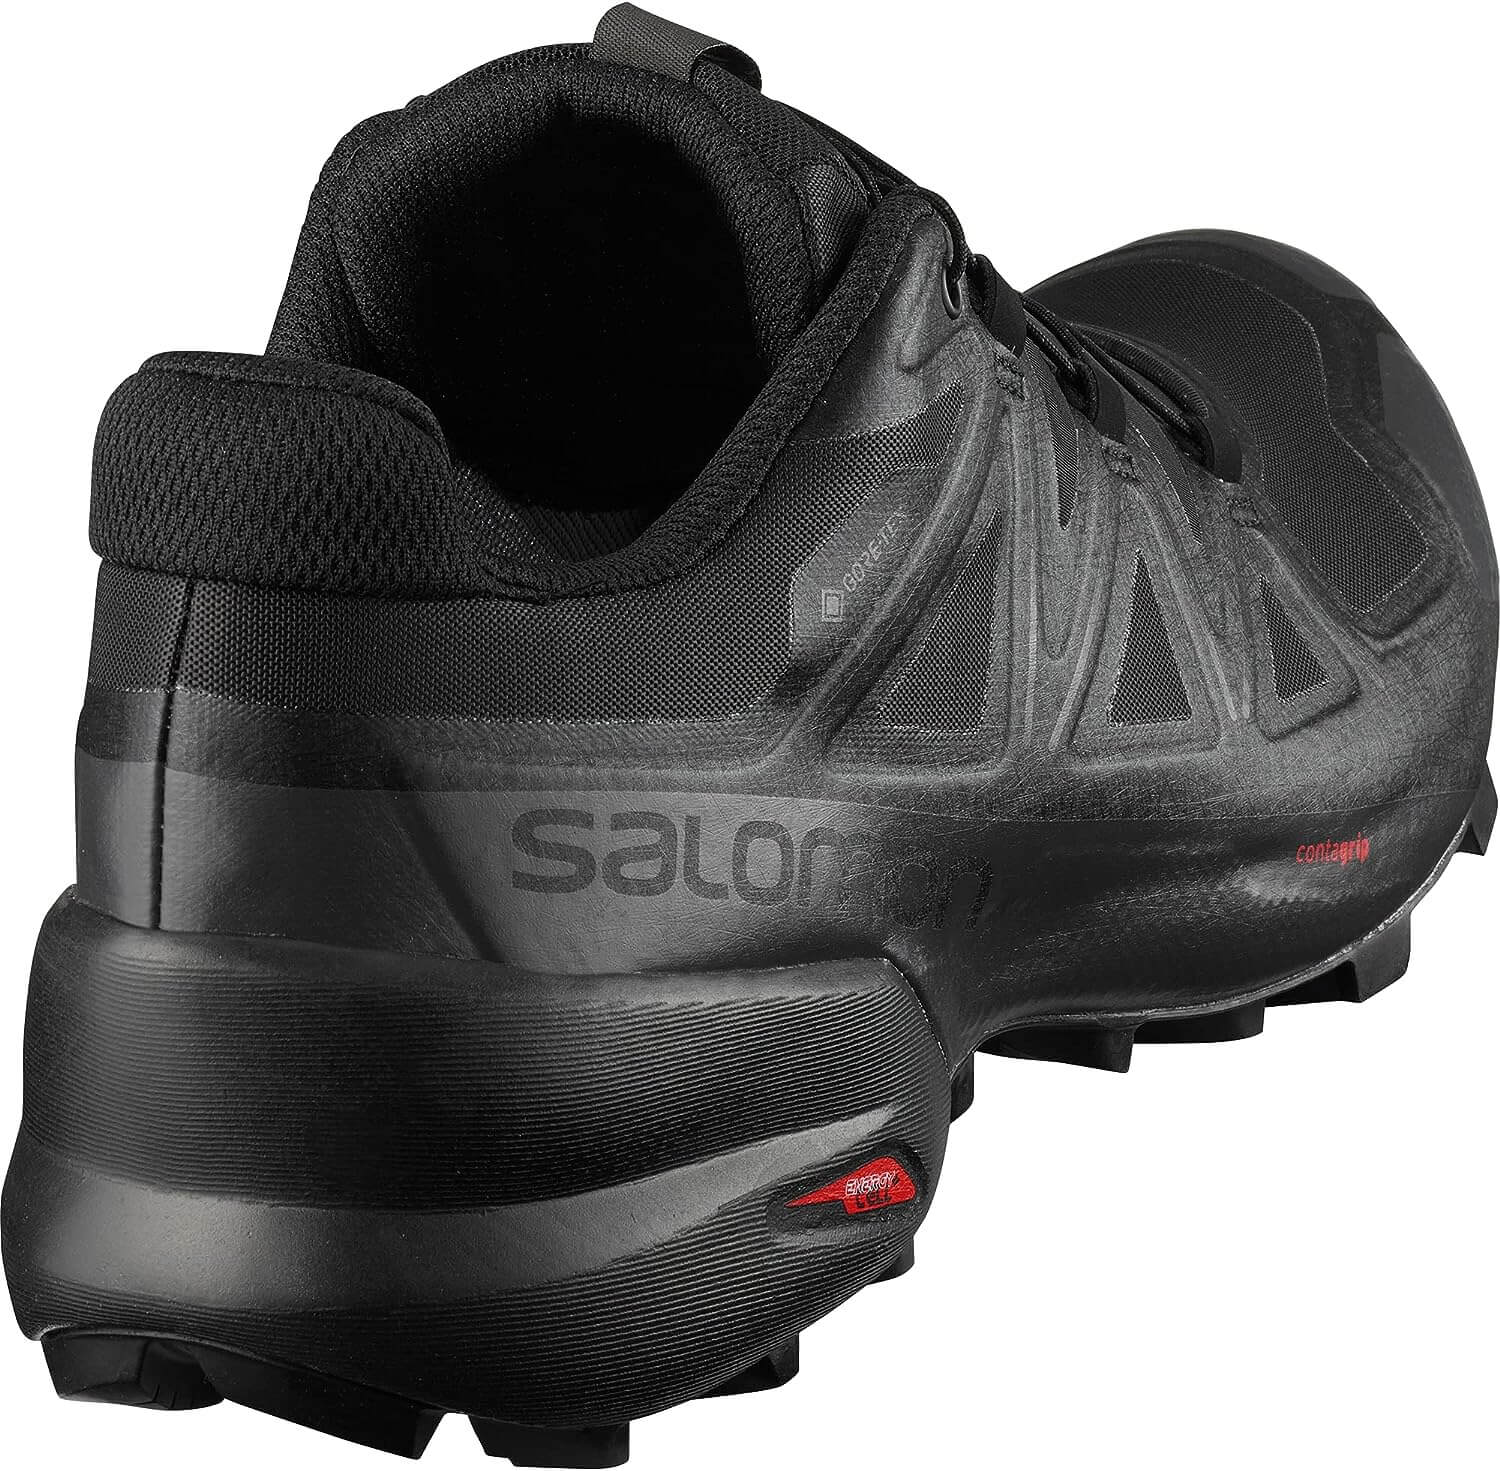 Shop The Latest >Salomon Men's Speedcross 5 GORE-TEX Trail Running Shoes > *Only $224.00*> From The Top Brand > *Salomonl* > Shop Now and Get Free Shipping On Orders Over $45.00 >*Shop Earth Foot*